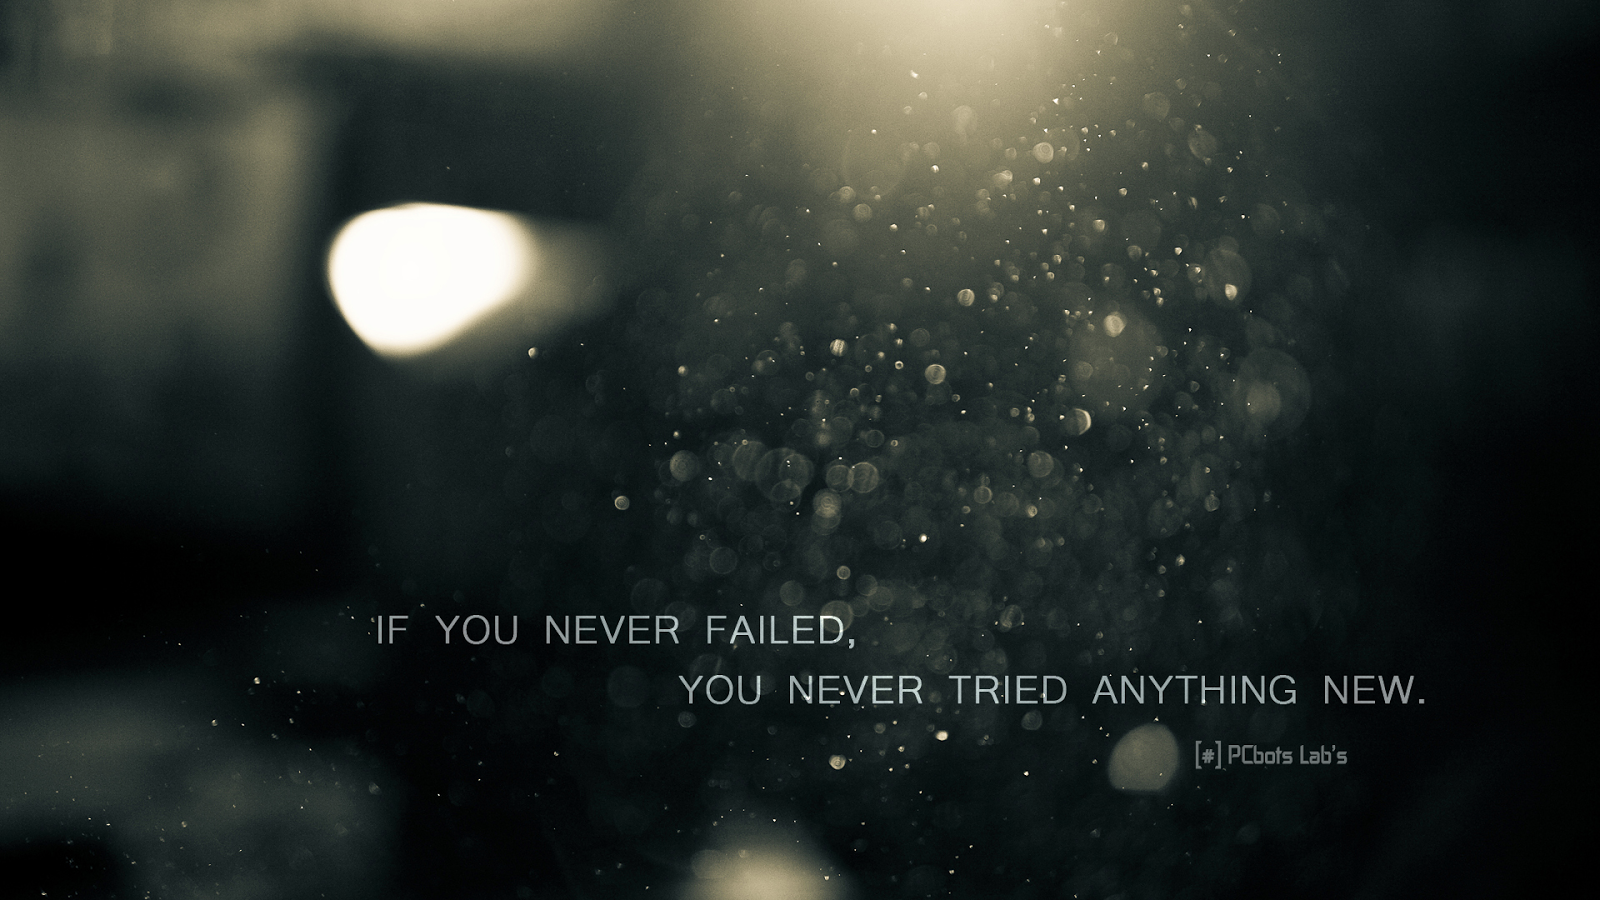 Programmers Wallpaper By PCbots. Inspirational wallpaper, Motivational wallpaper, Popular quotes